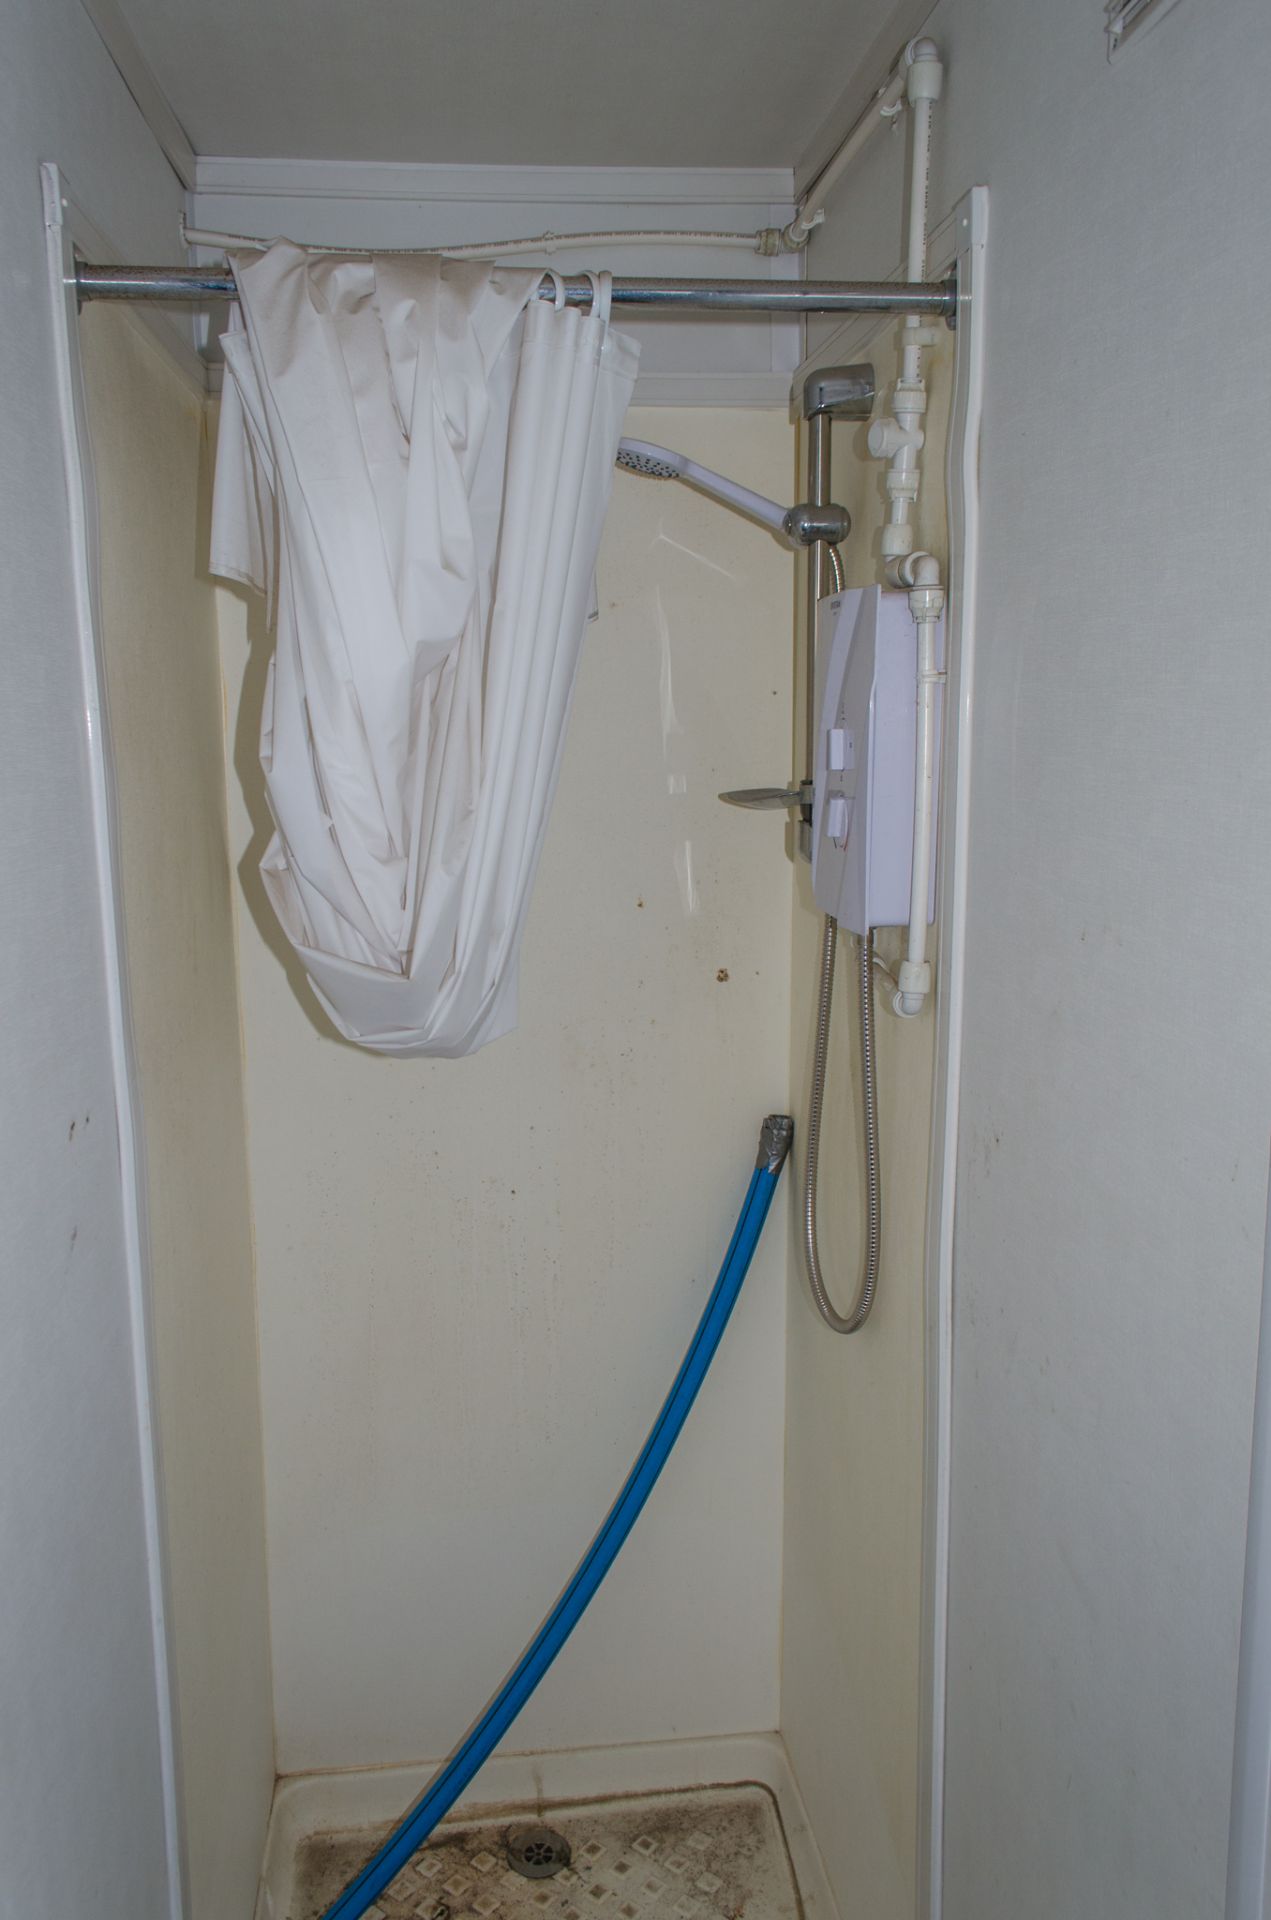 32 ft x 10 ft steel jack leg shower site unit Comprising of 8 - showers & changing area BBA1684 - Image 14 of 14